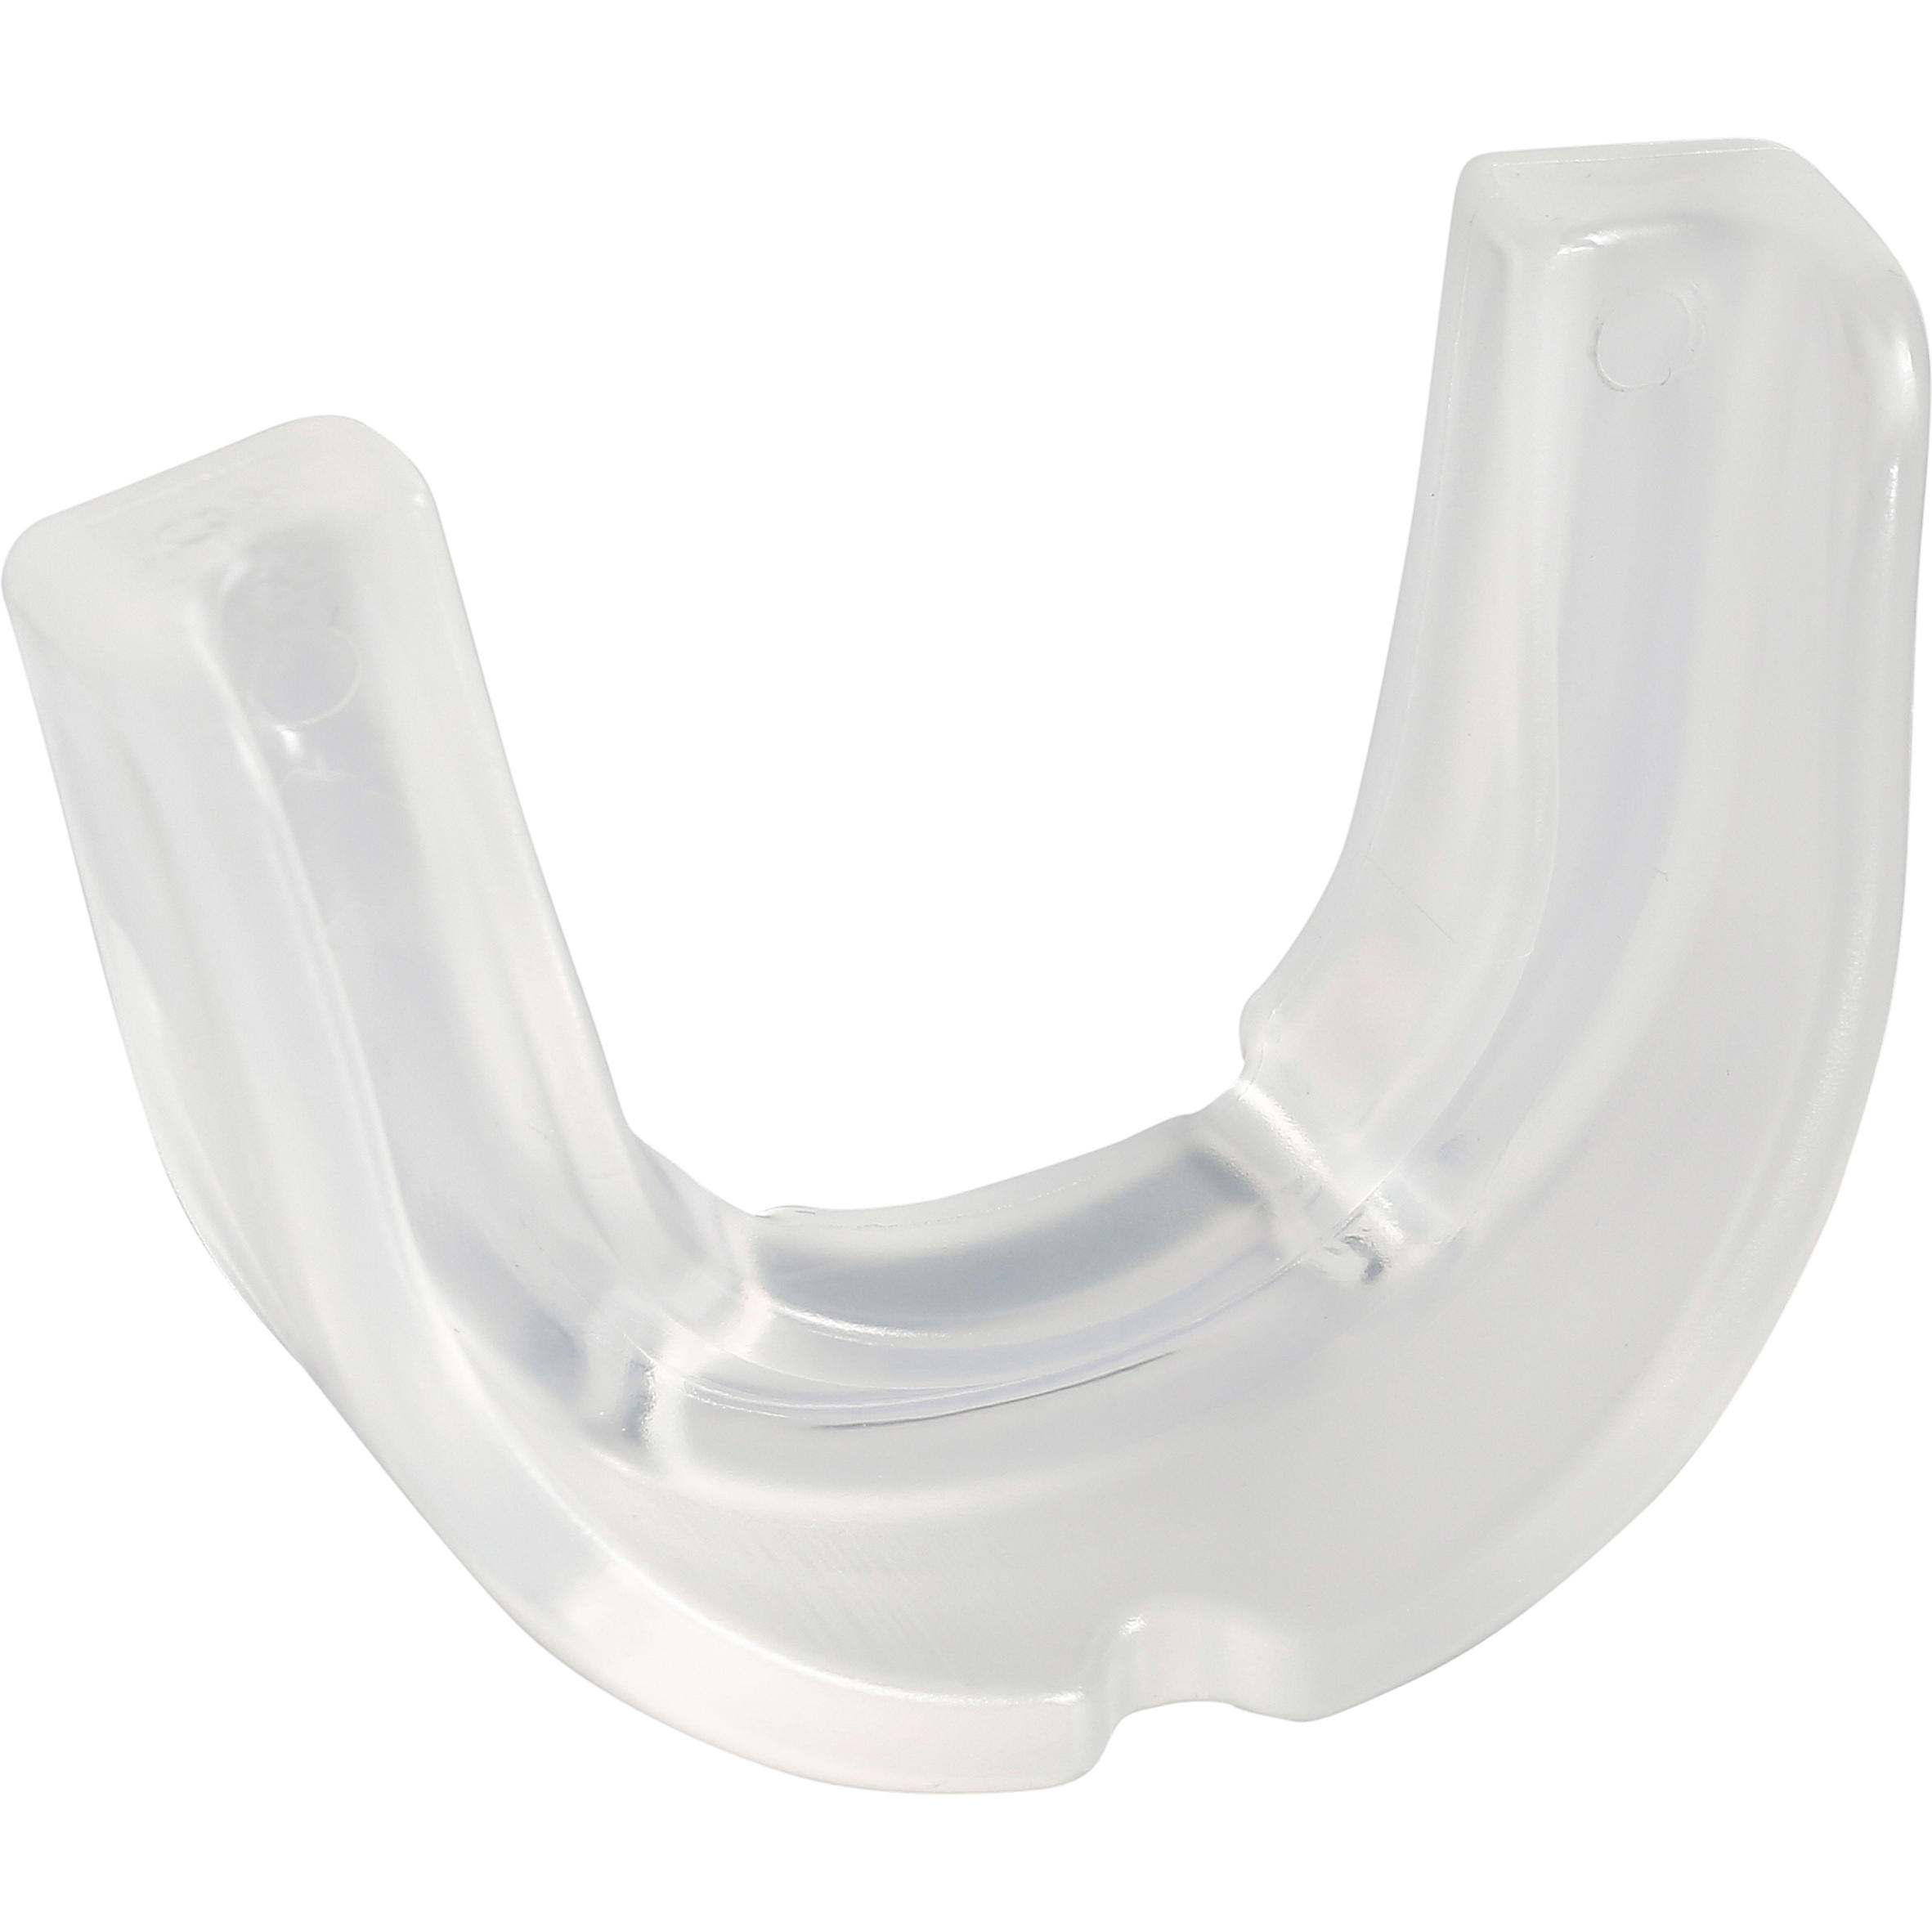 Low- to Medium-Intensity Field Hockey Mouthguard FH100 - Transparent 5/5